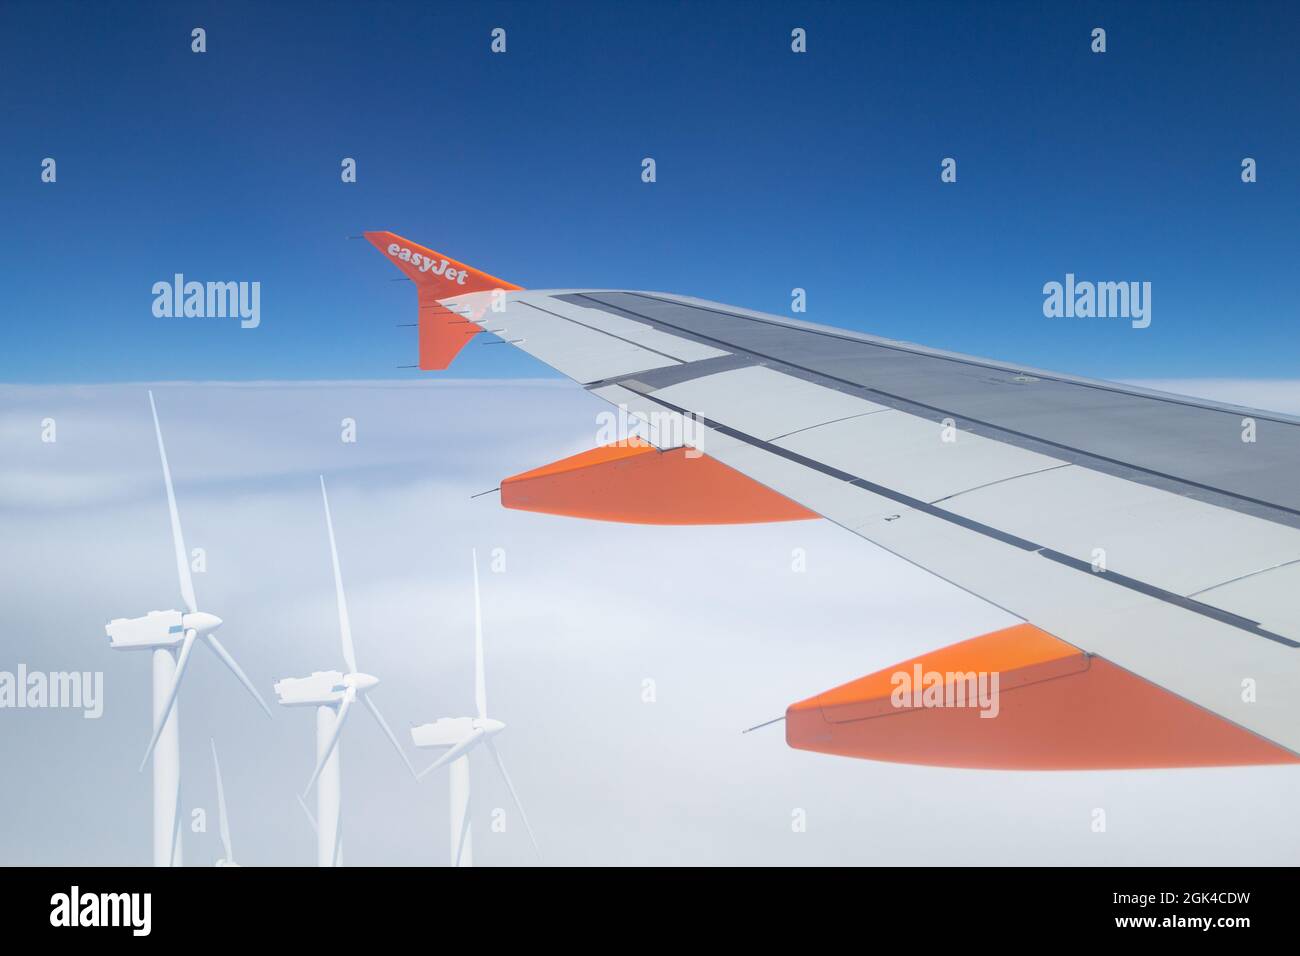 Easyjet airplane flying above wind turbines. Aviation industry clean, g... concept Stock Photo